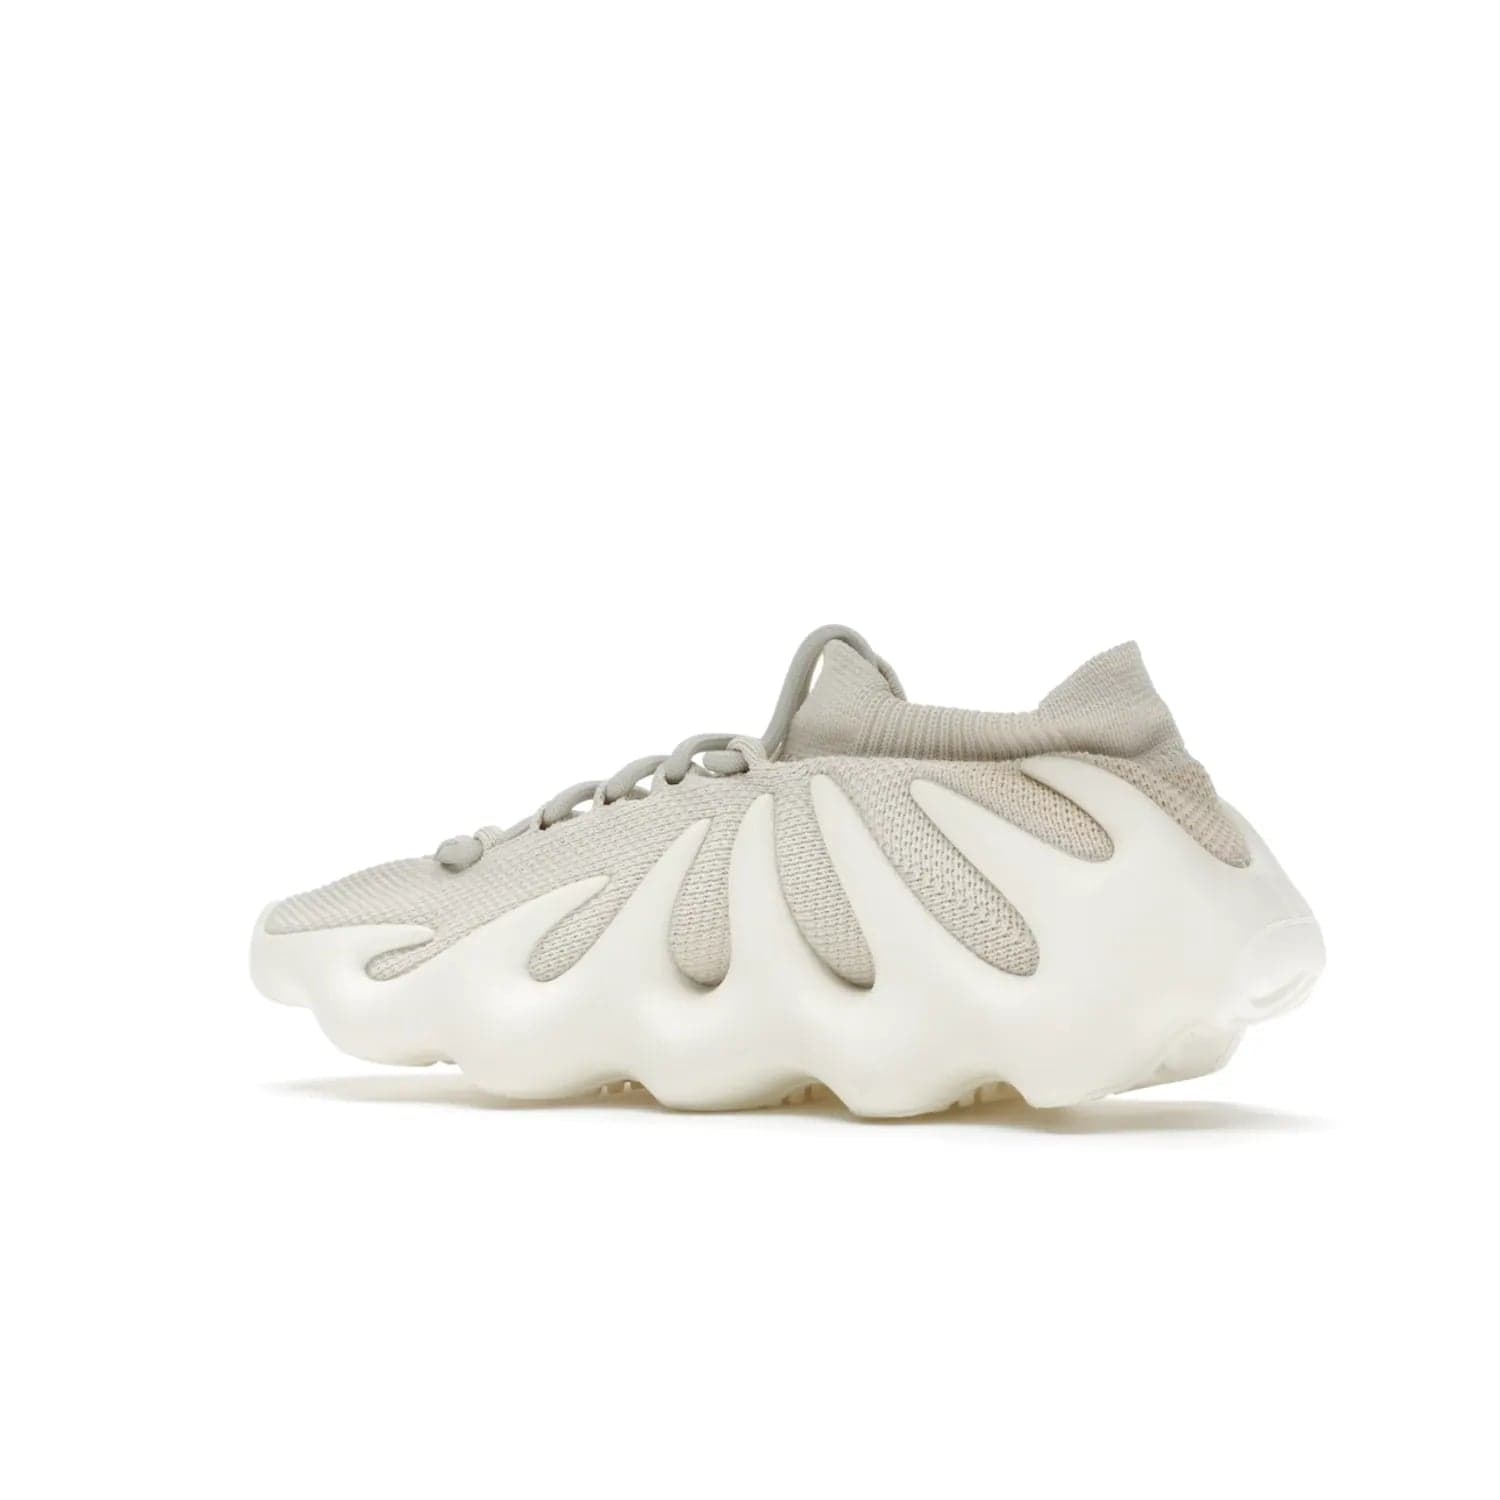 adidas Yeezy 450 Cloud White - Image 22 - Only at www.BallersClubKickz.com - Experience the future with the adidas Yeezy 450 Cloud White. A two-piece design featuring an extreme foam sole and mesh upper, this silhouette is expected to release in March 2021. Get your hands on this striking Cloud White/Cloud White colorway and stand out in the crowd.